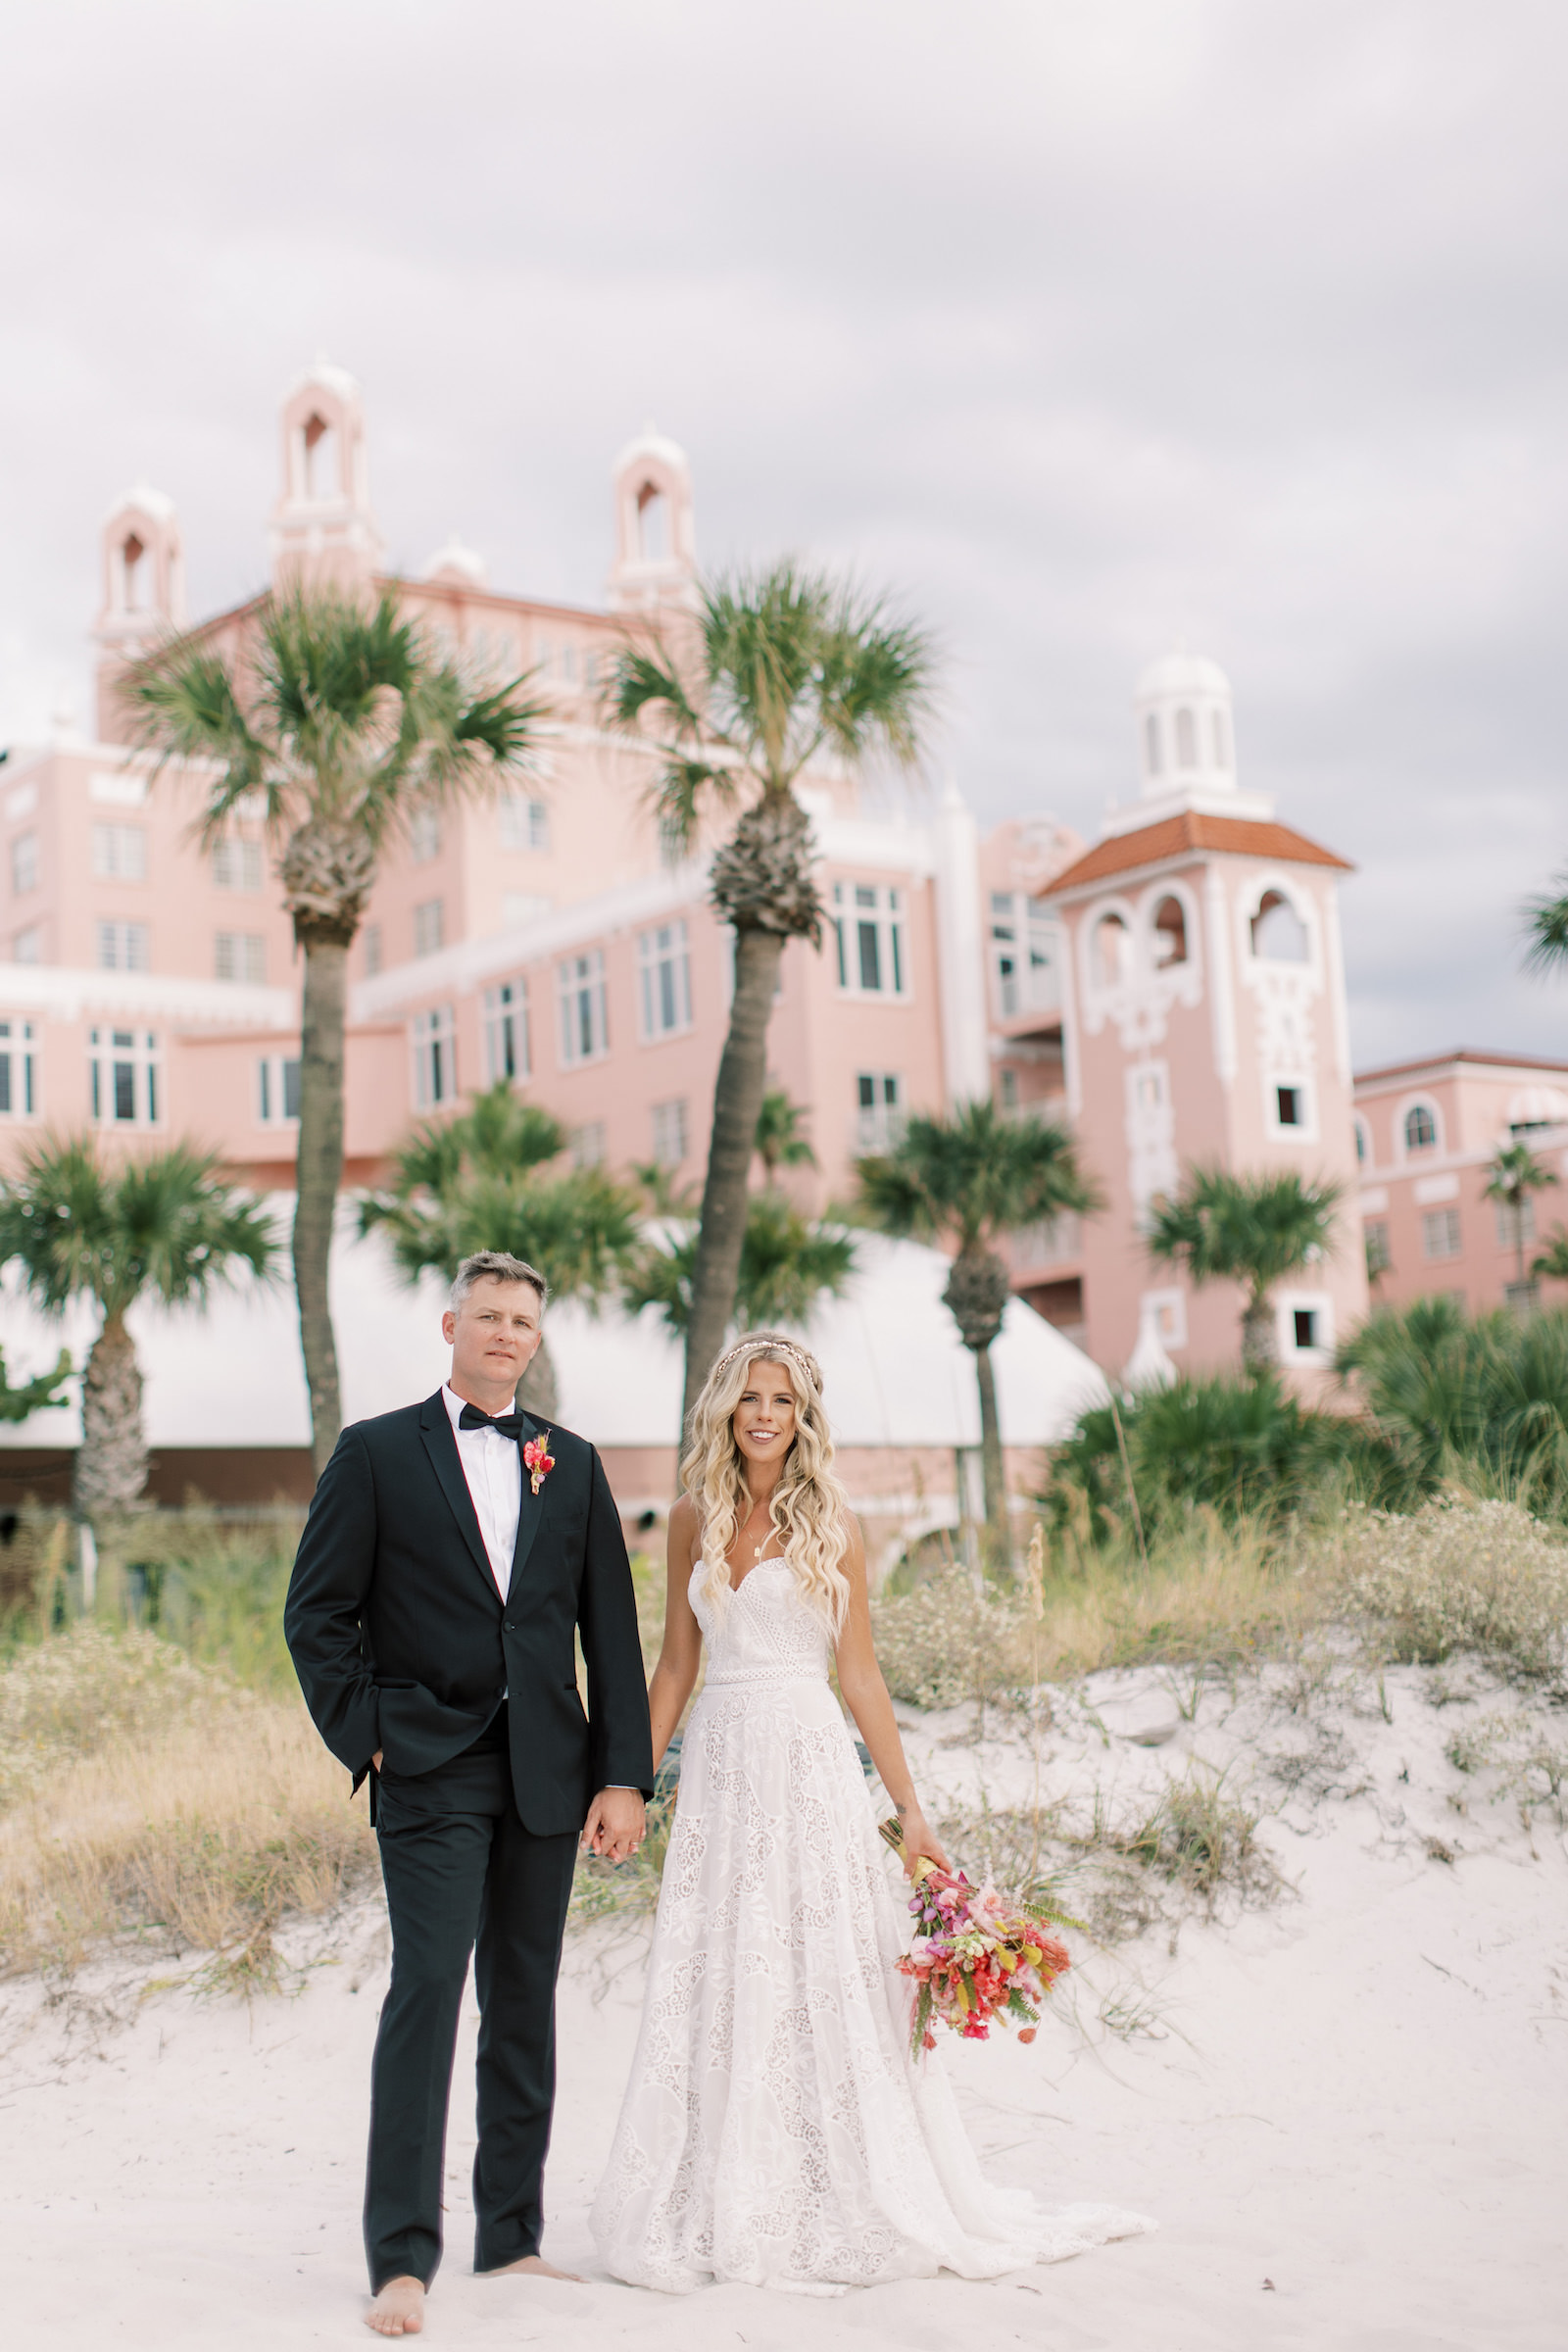 Vibrant Boho Bride and Groom Portrait on Beach | St. Petersburg Waterfront Wedding Venue The Don CeSar | Tampa Bay Wedding Hair and Makeup Femme Akoi Beauty Studio